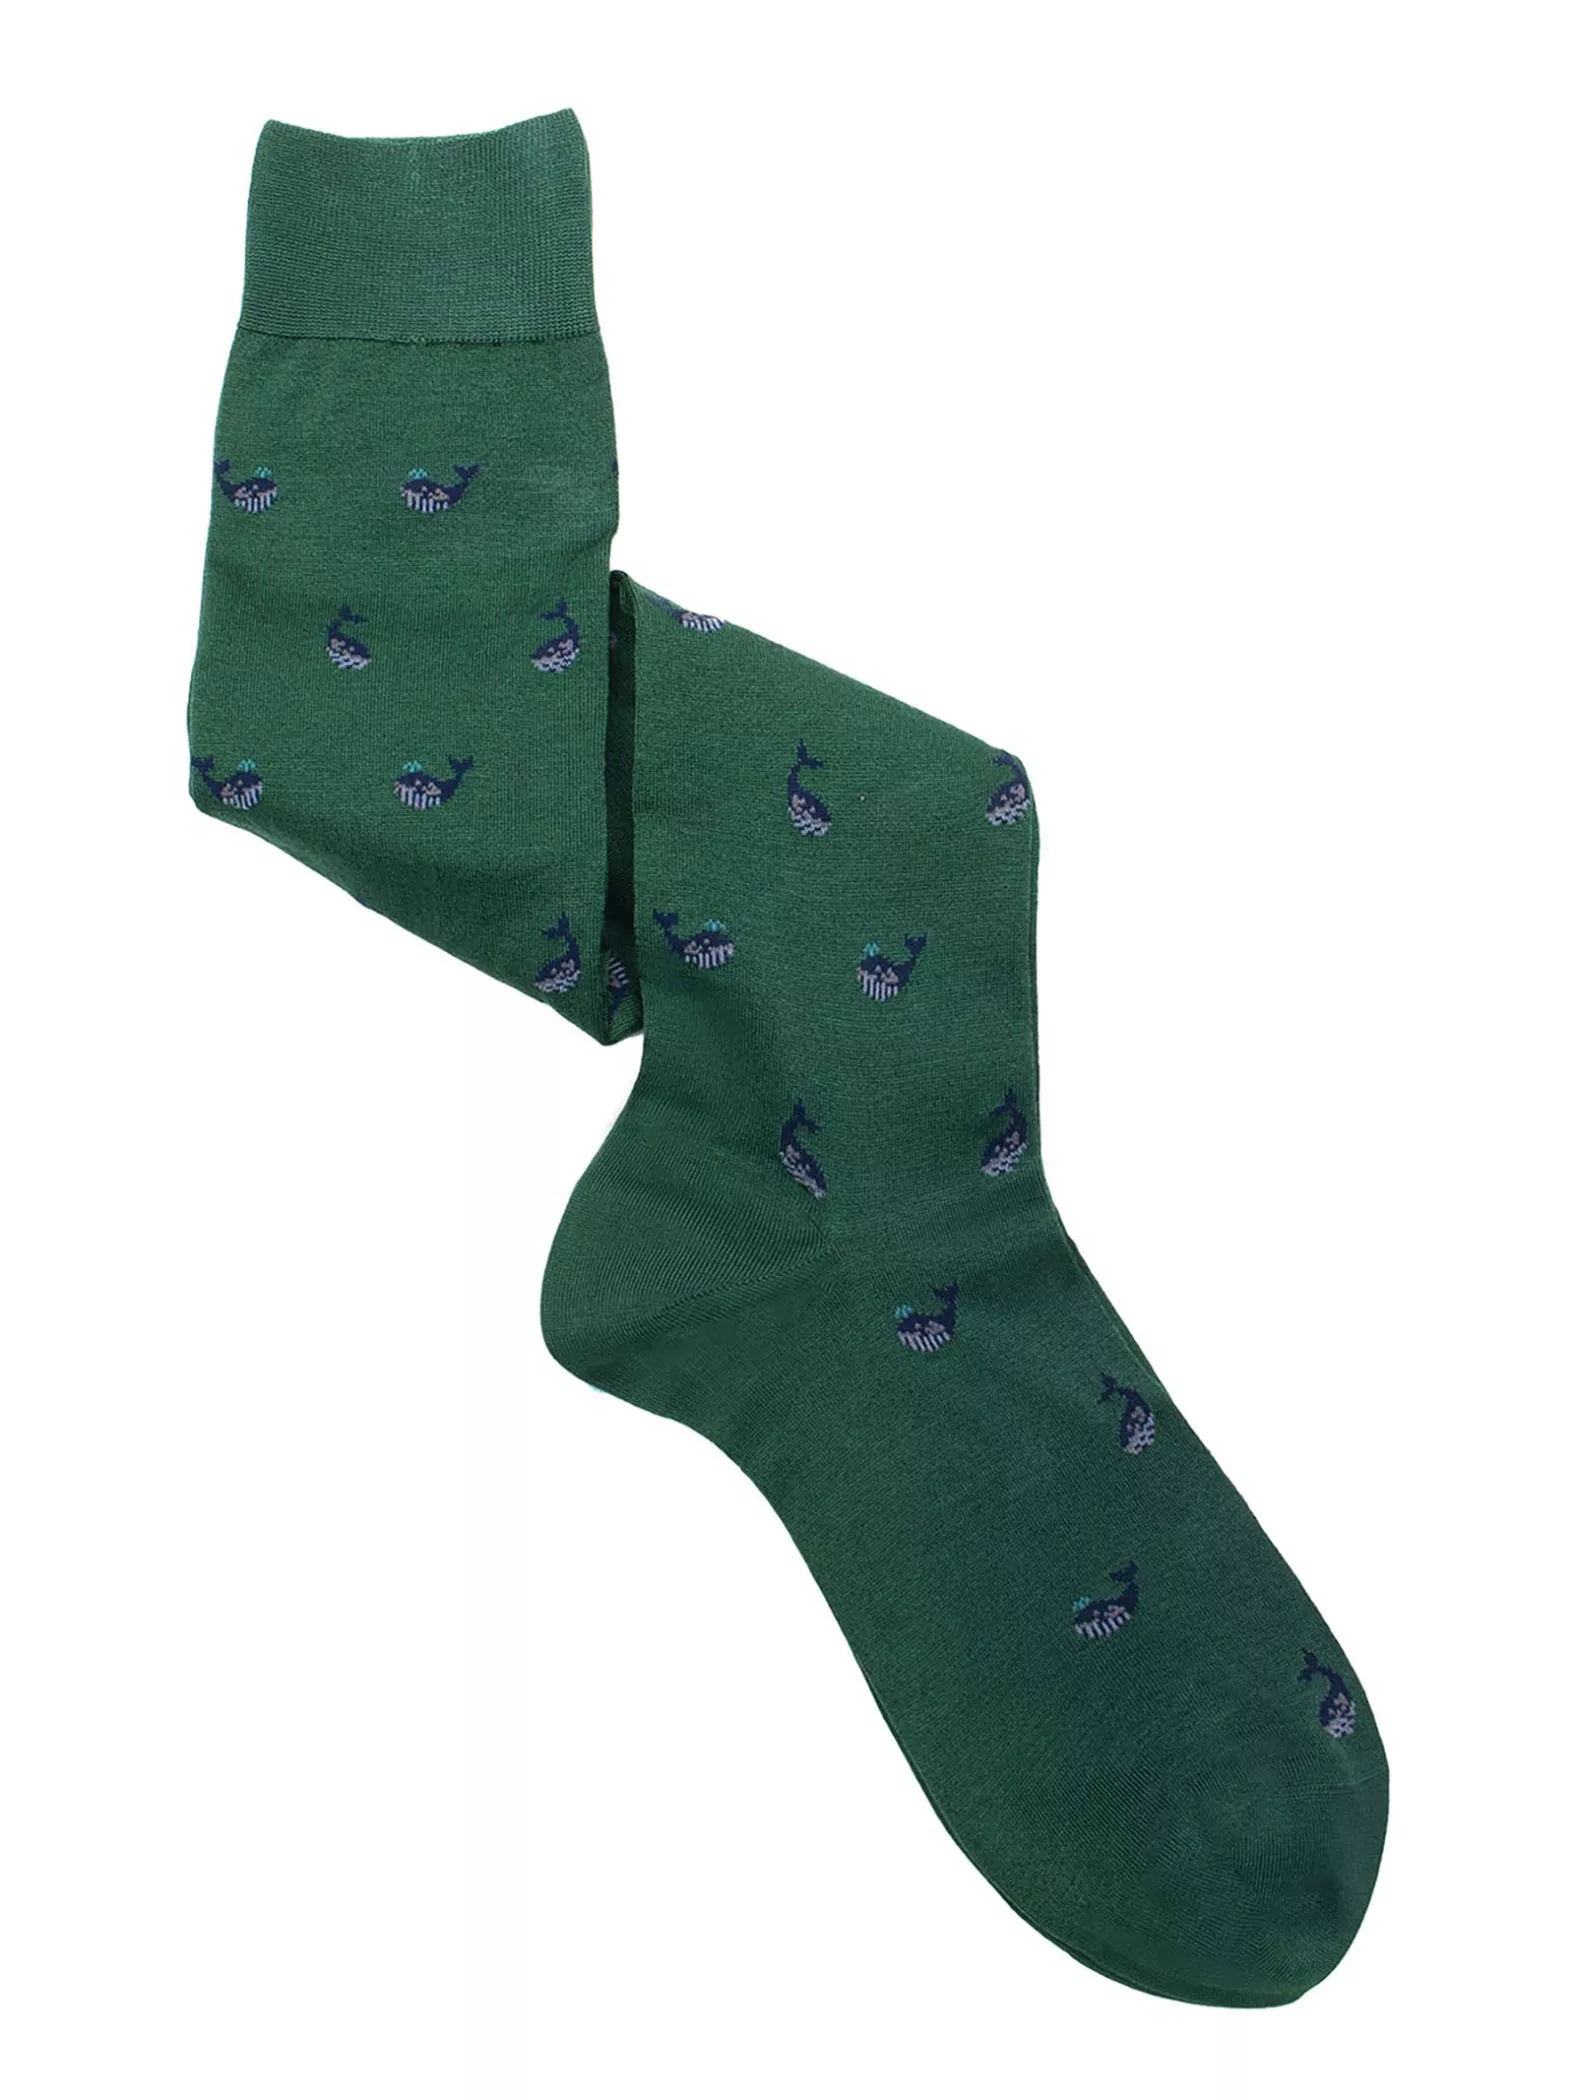 Whale patterned long socks in cool cotton